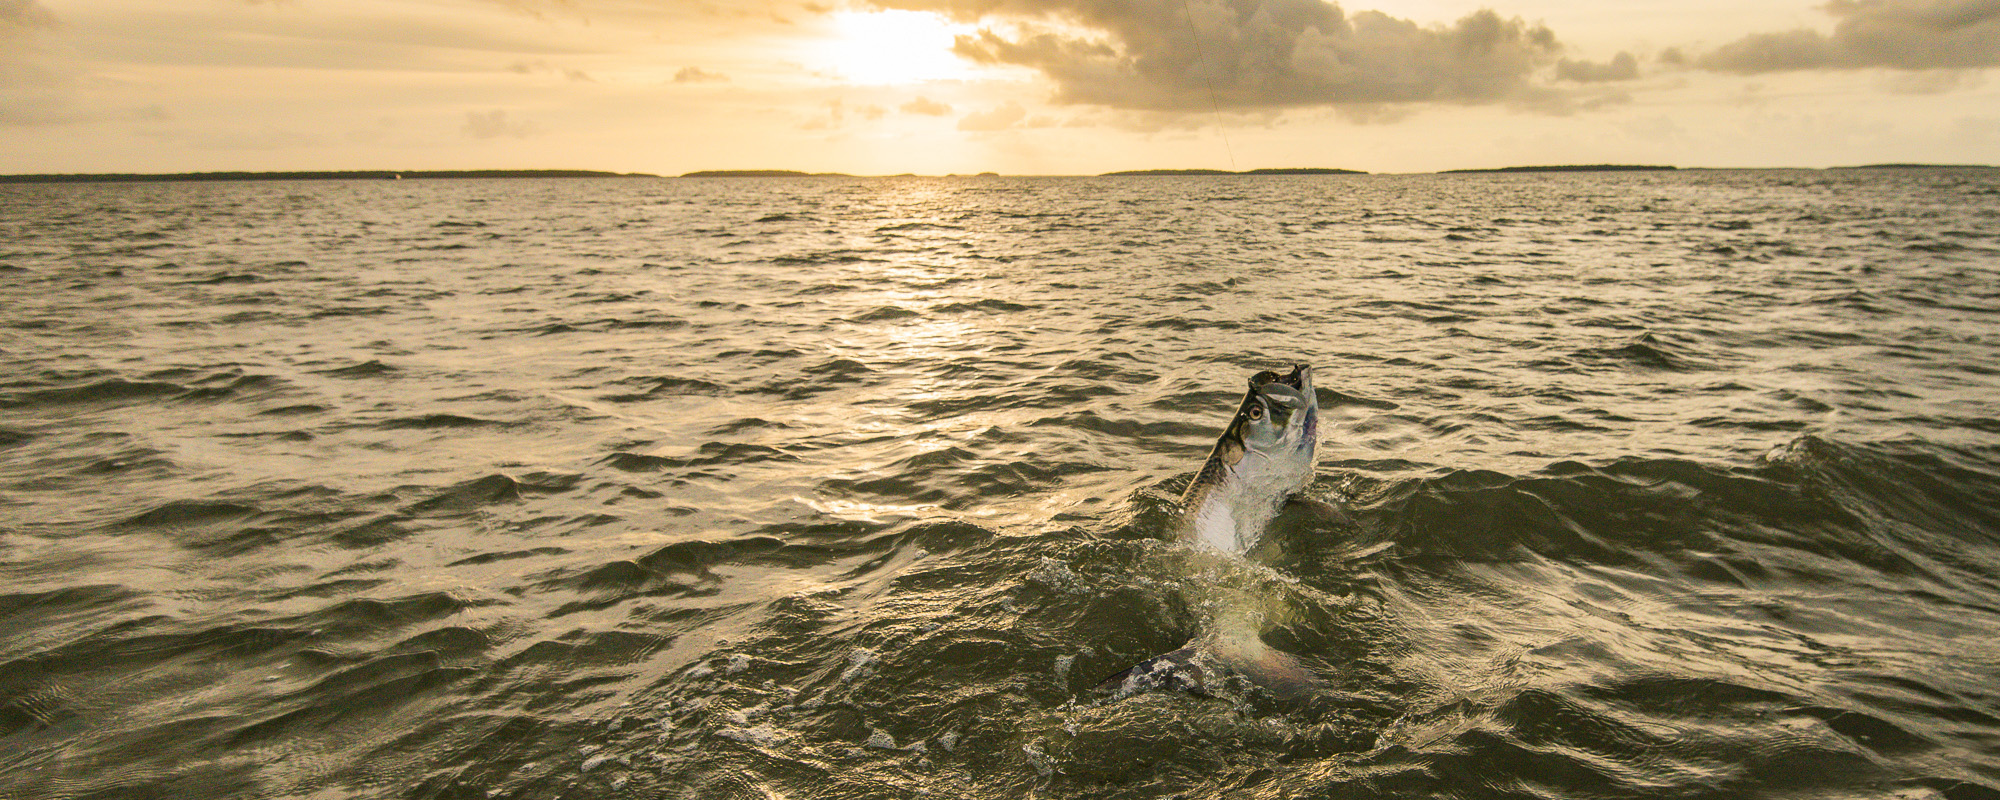 large tarpon jumping out of the water. Golden sunset in the background